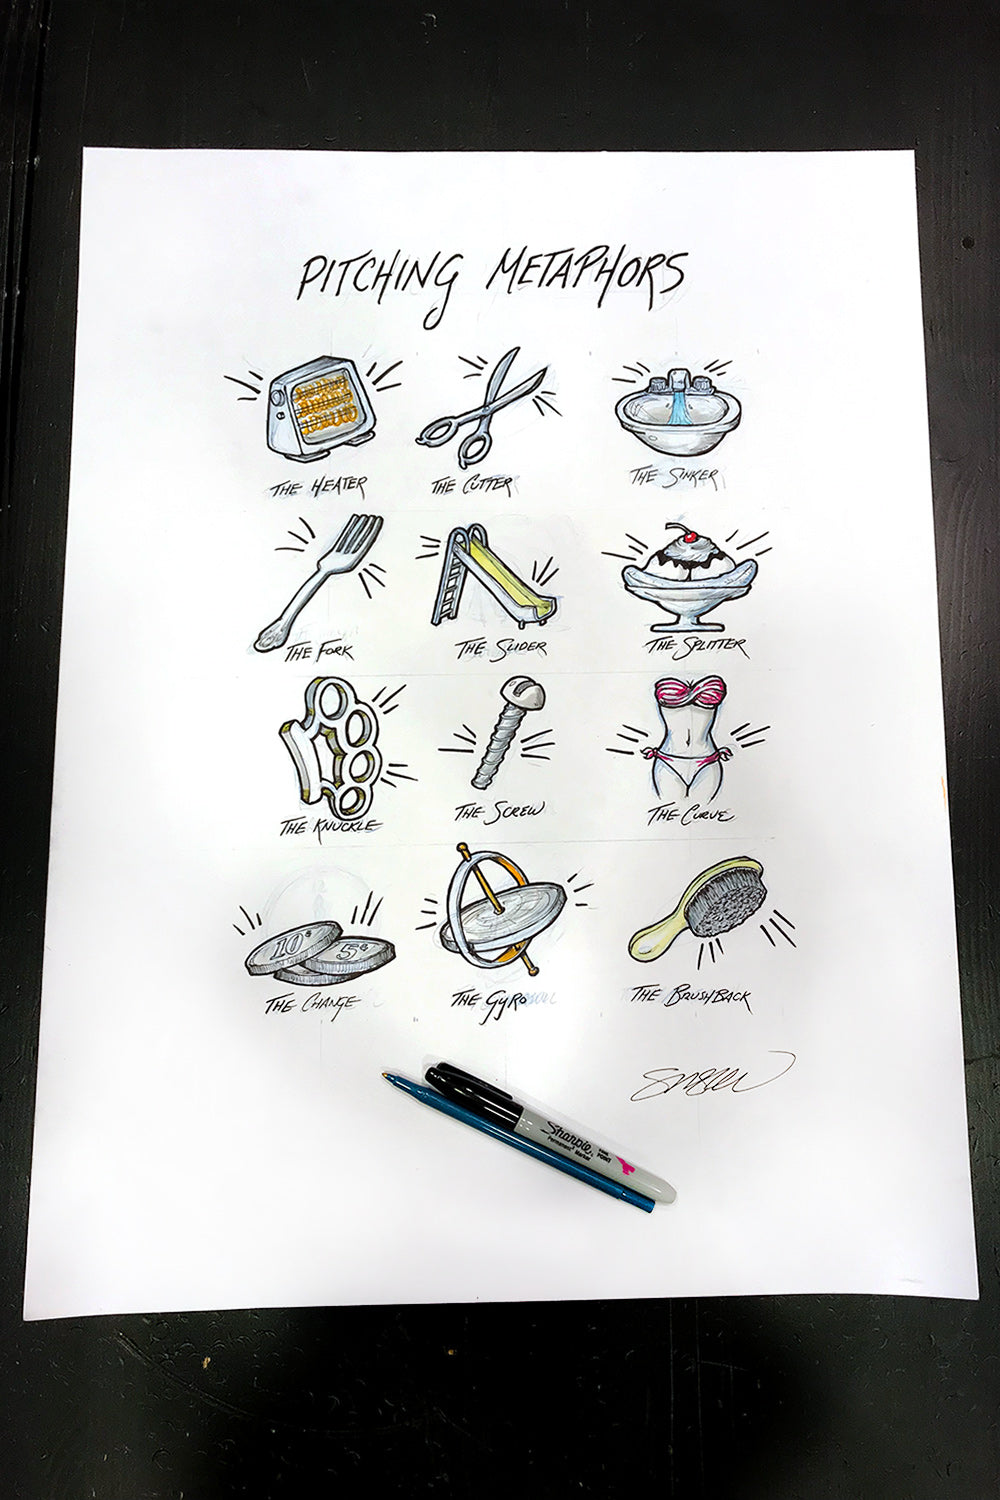 Pitching Metaphors Sketch Limited Edition - S. Preston Art + Designs - S. Preston Art + Designs